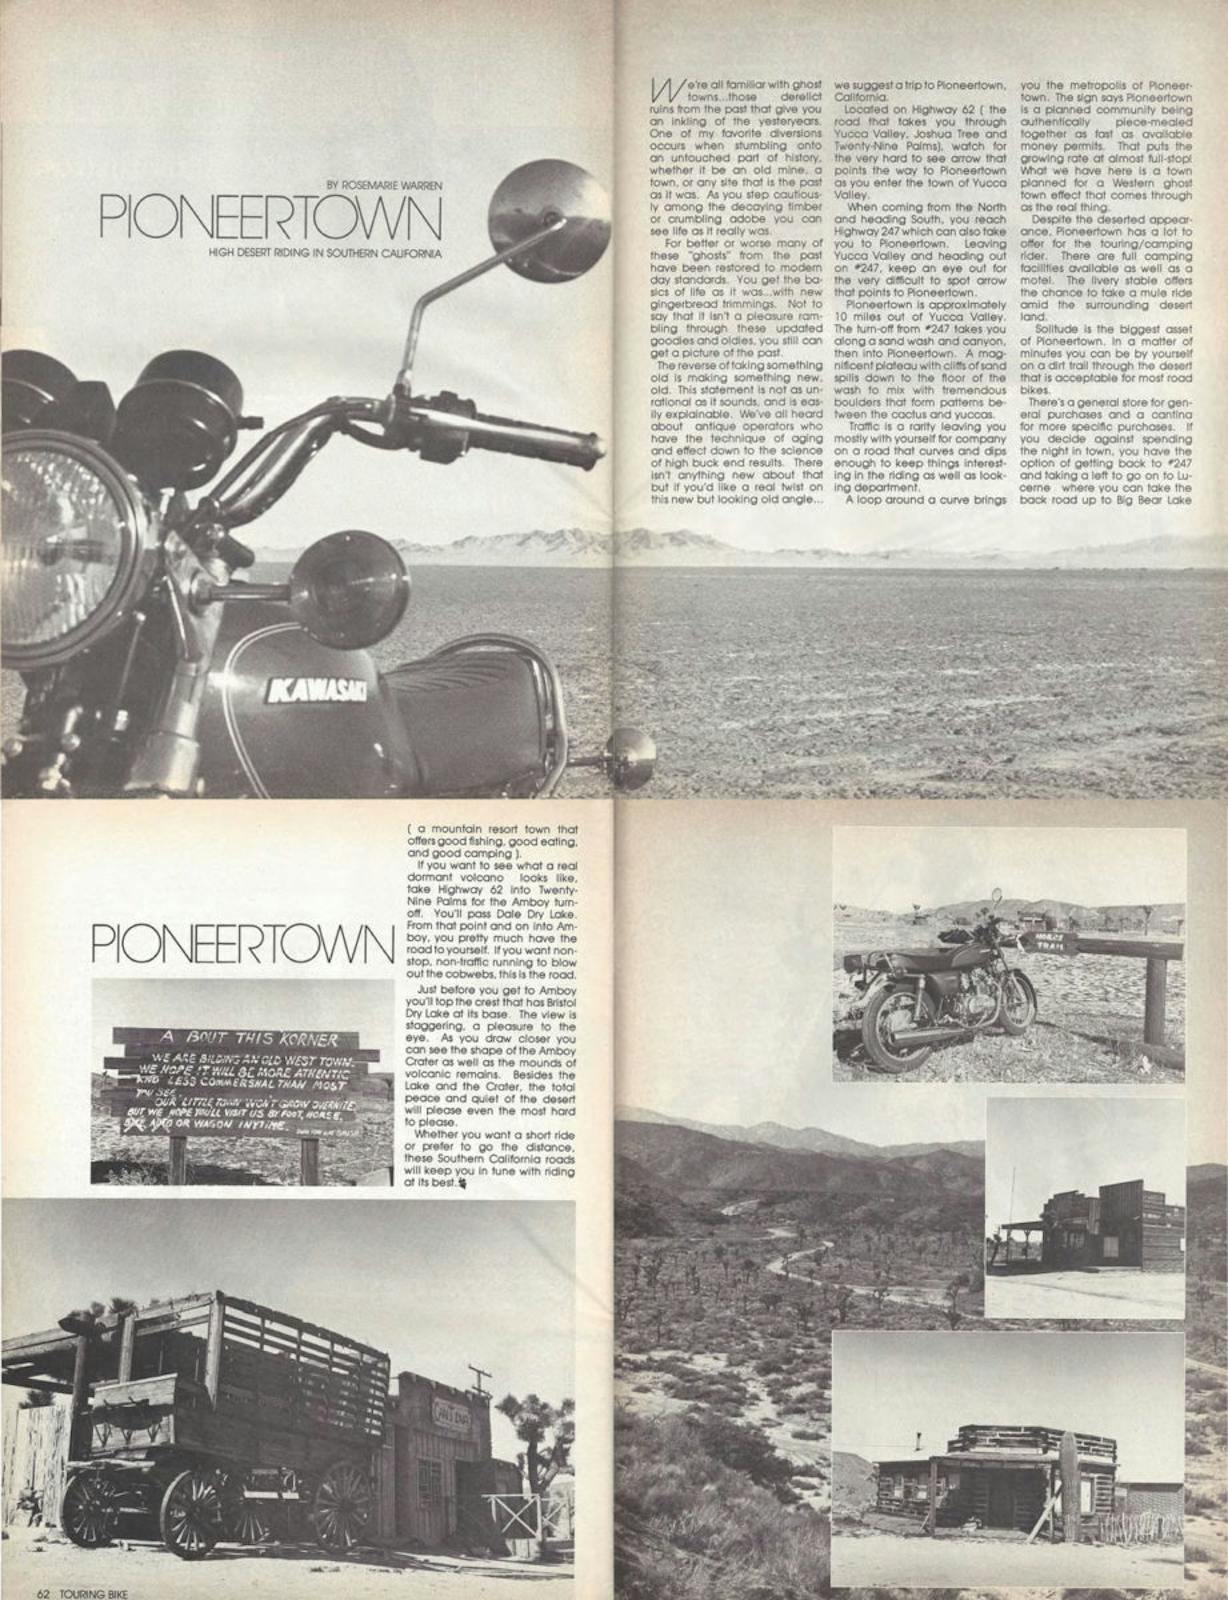 Touring Bike Pioneertown article from 1977